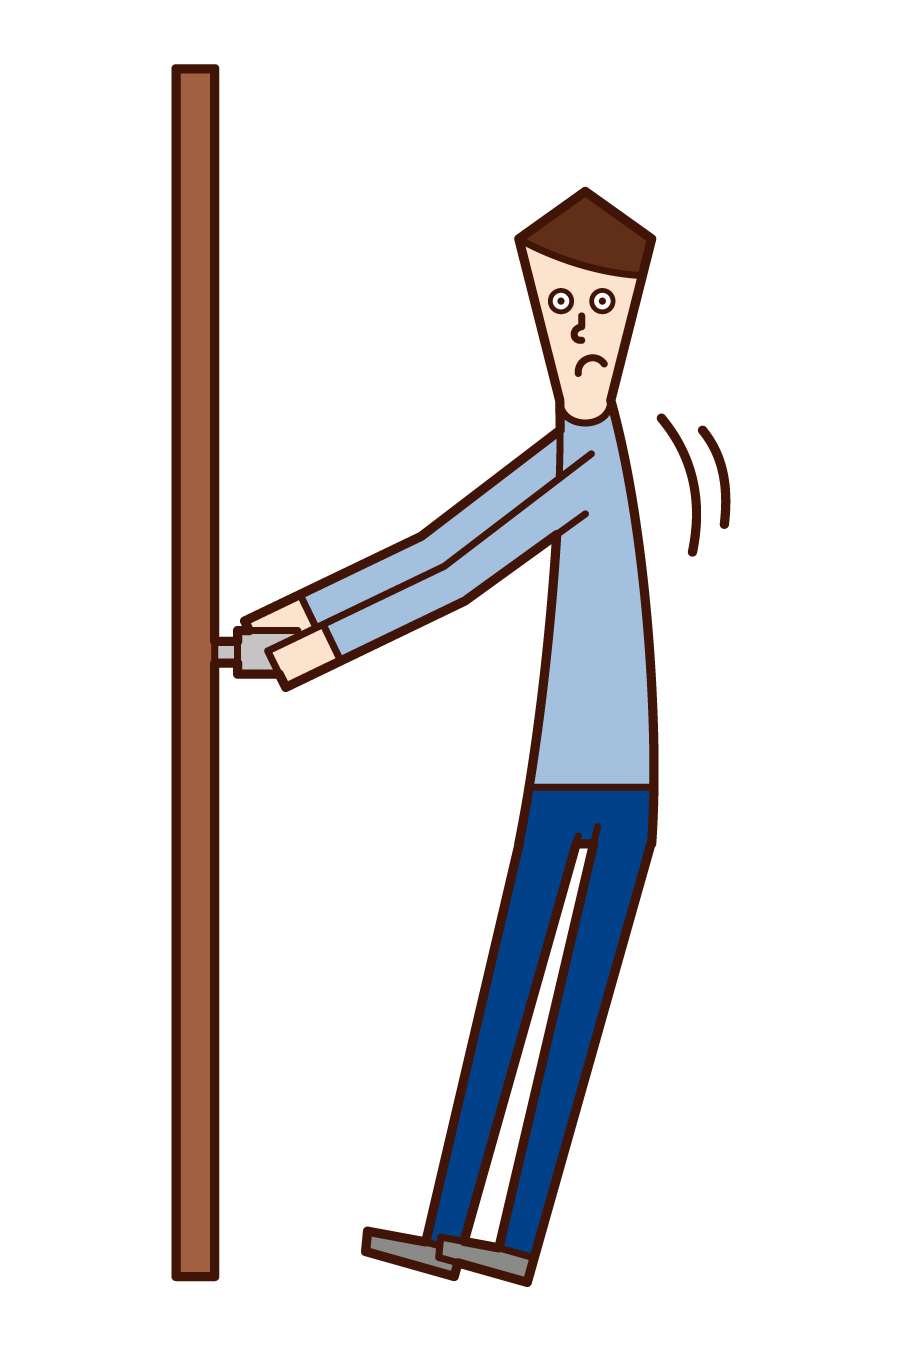 Illustration of a man trying to open a door that doesn't open